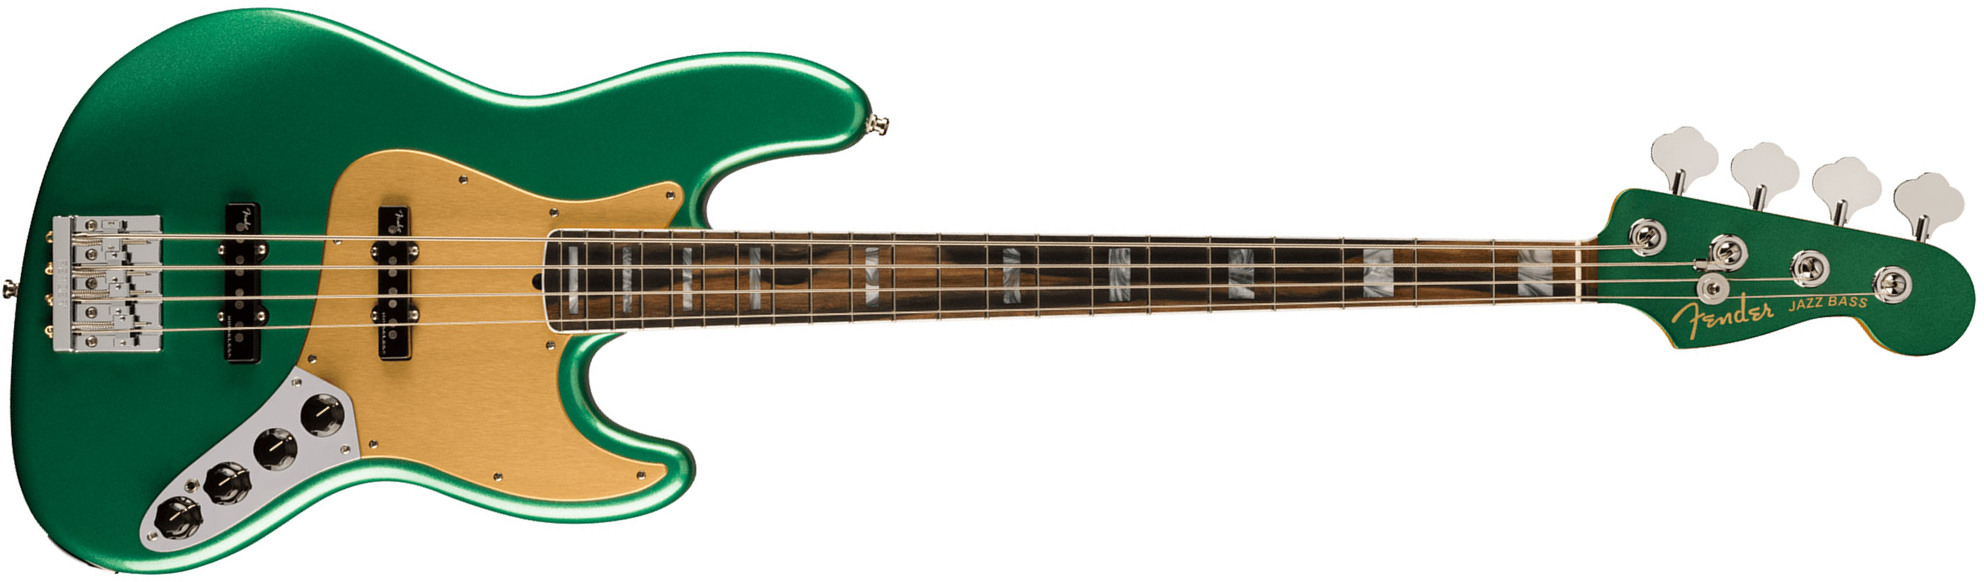 Fender Jazz Bass American Ultra Ltd Usa Active Eb - Mystic Pine Green - Basse Électrique Solid Body - Main picture